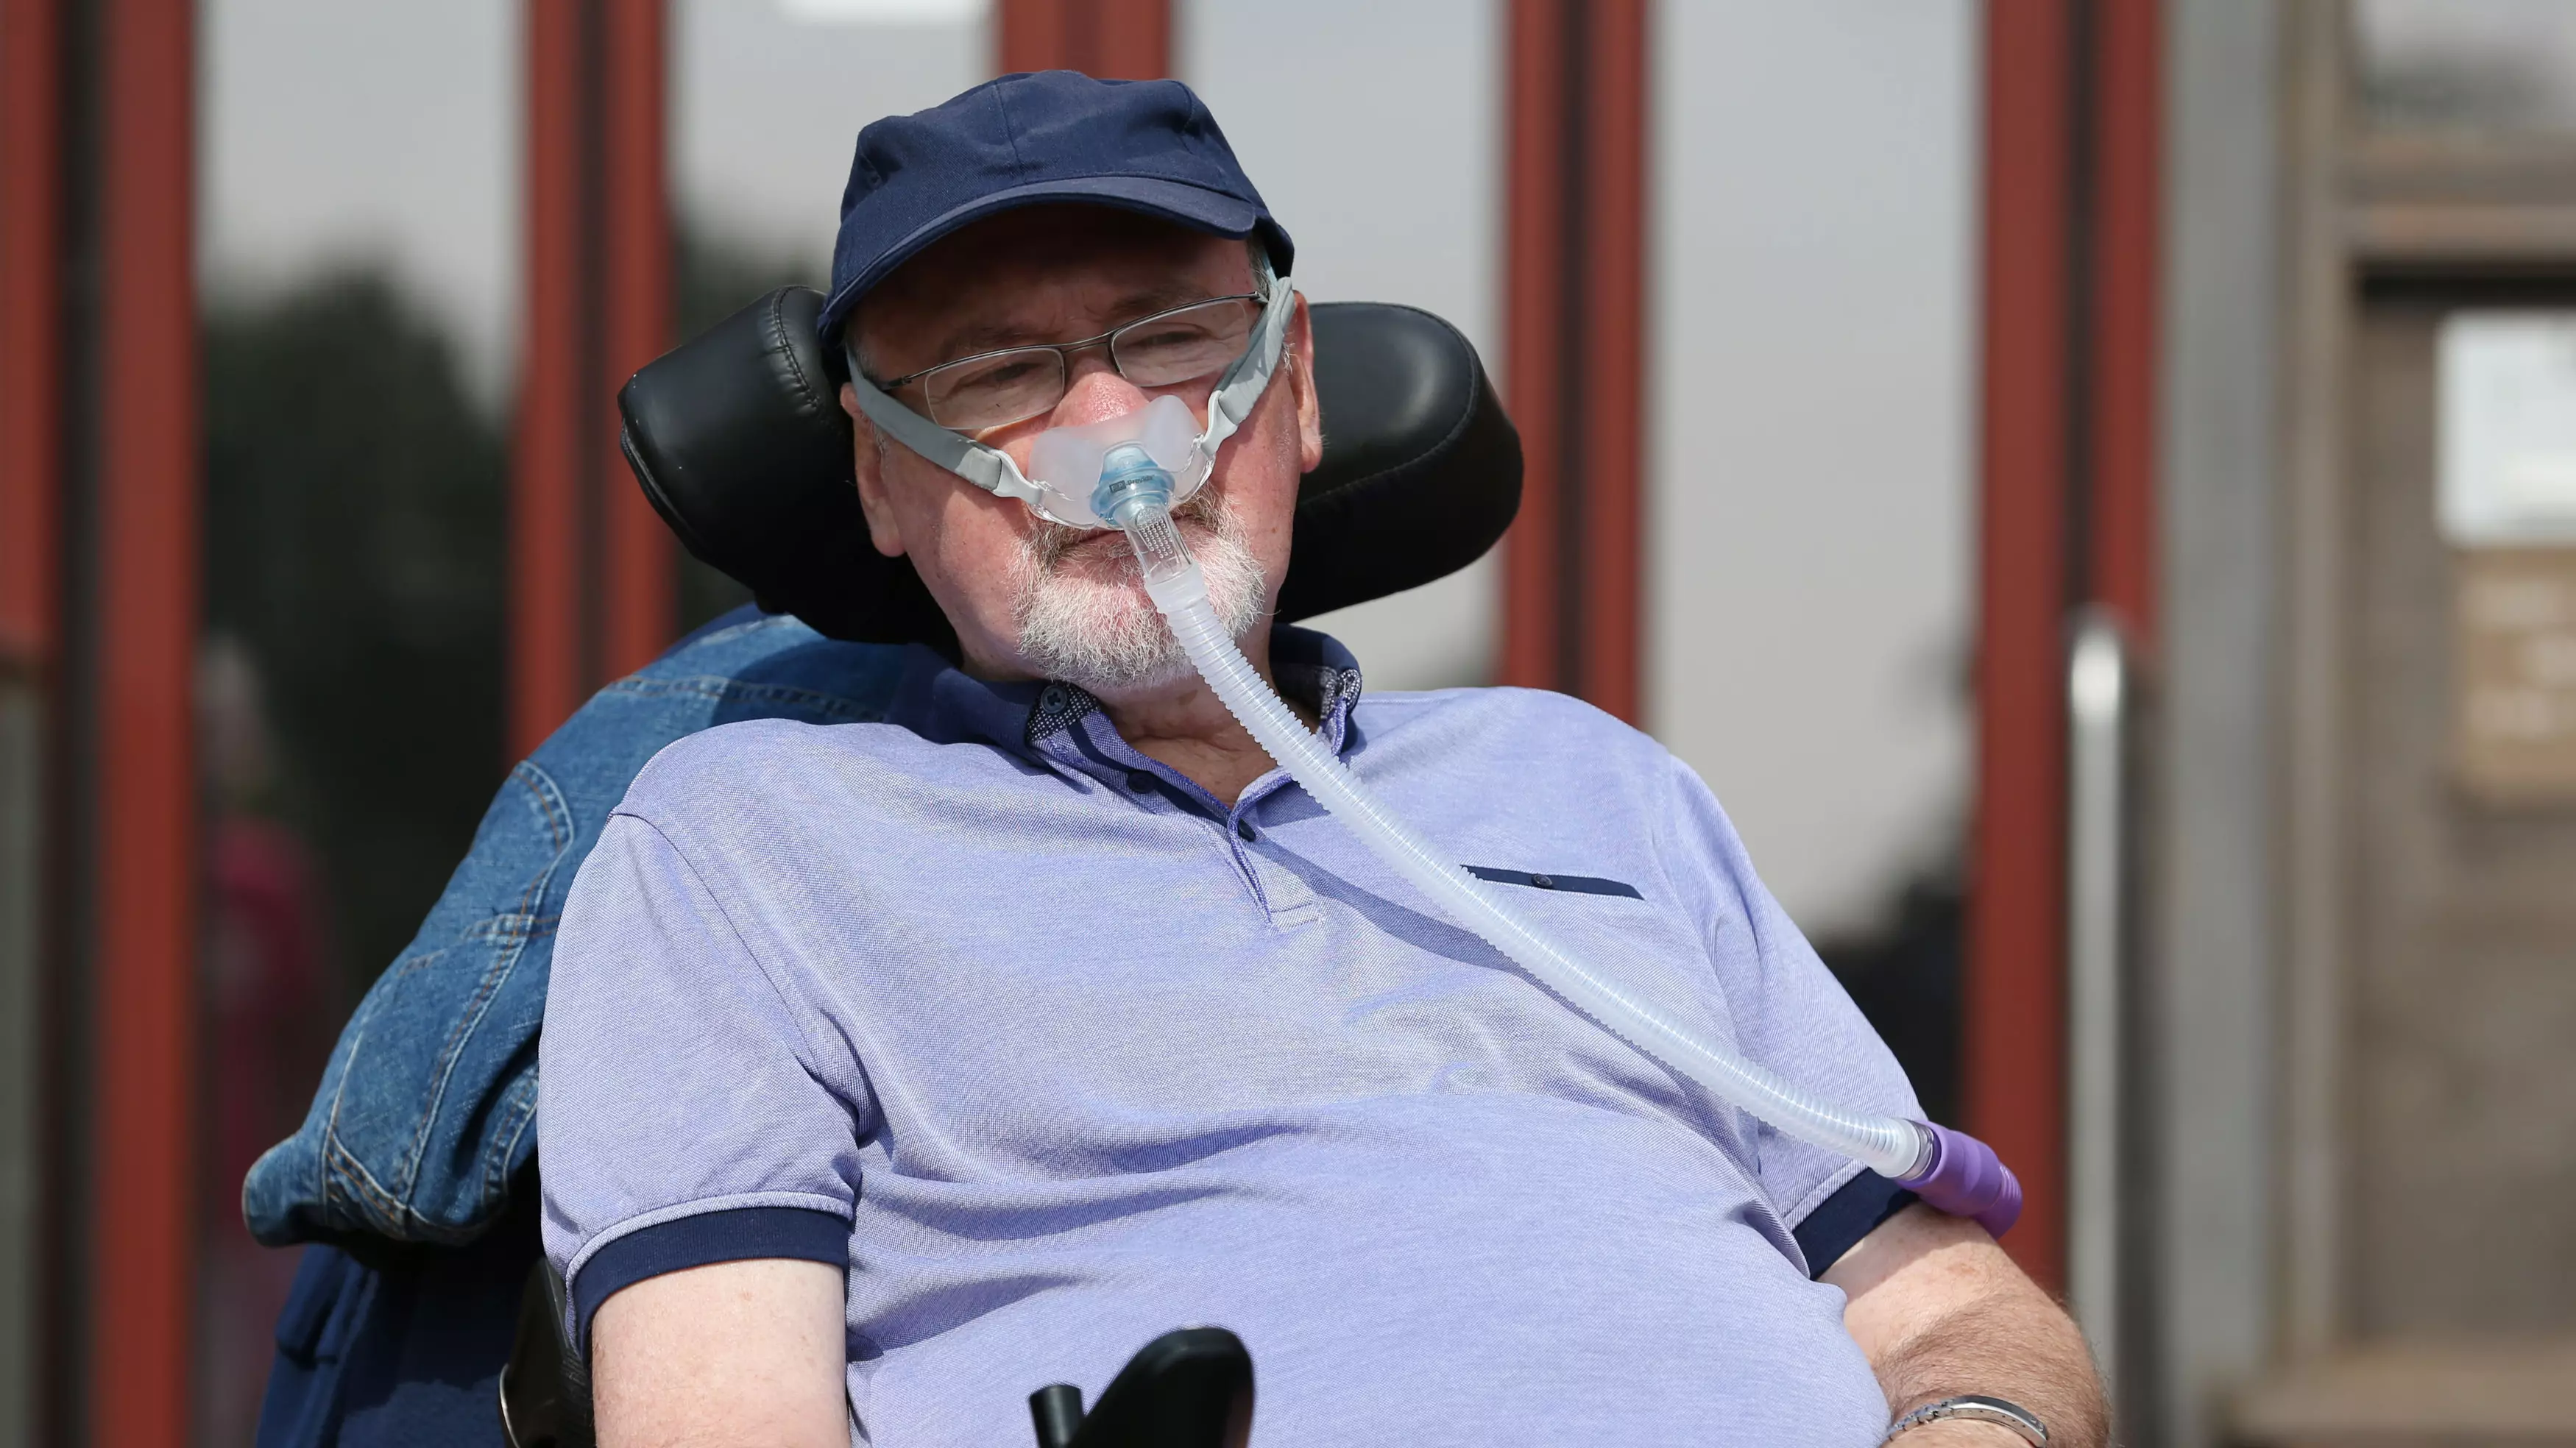 Terminally Ill Man Wins Right To Challenge Ruling Preventing ‘Peaceful And Dignified Death’